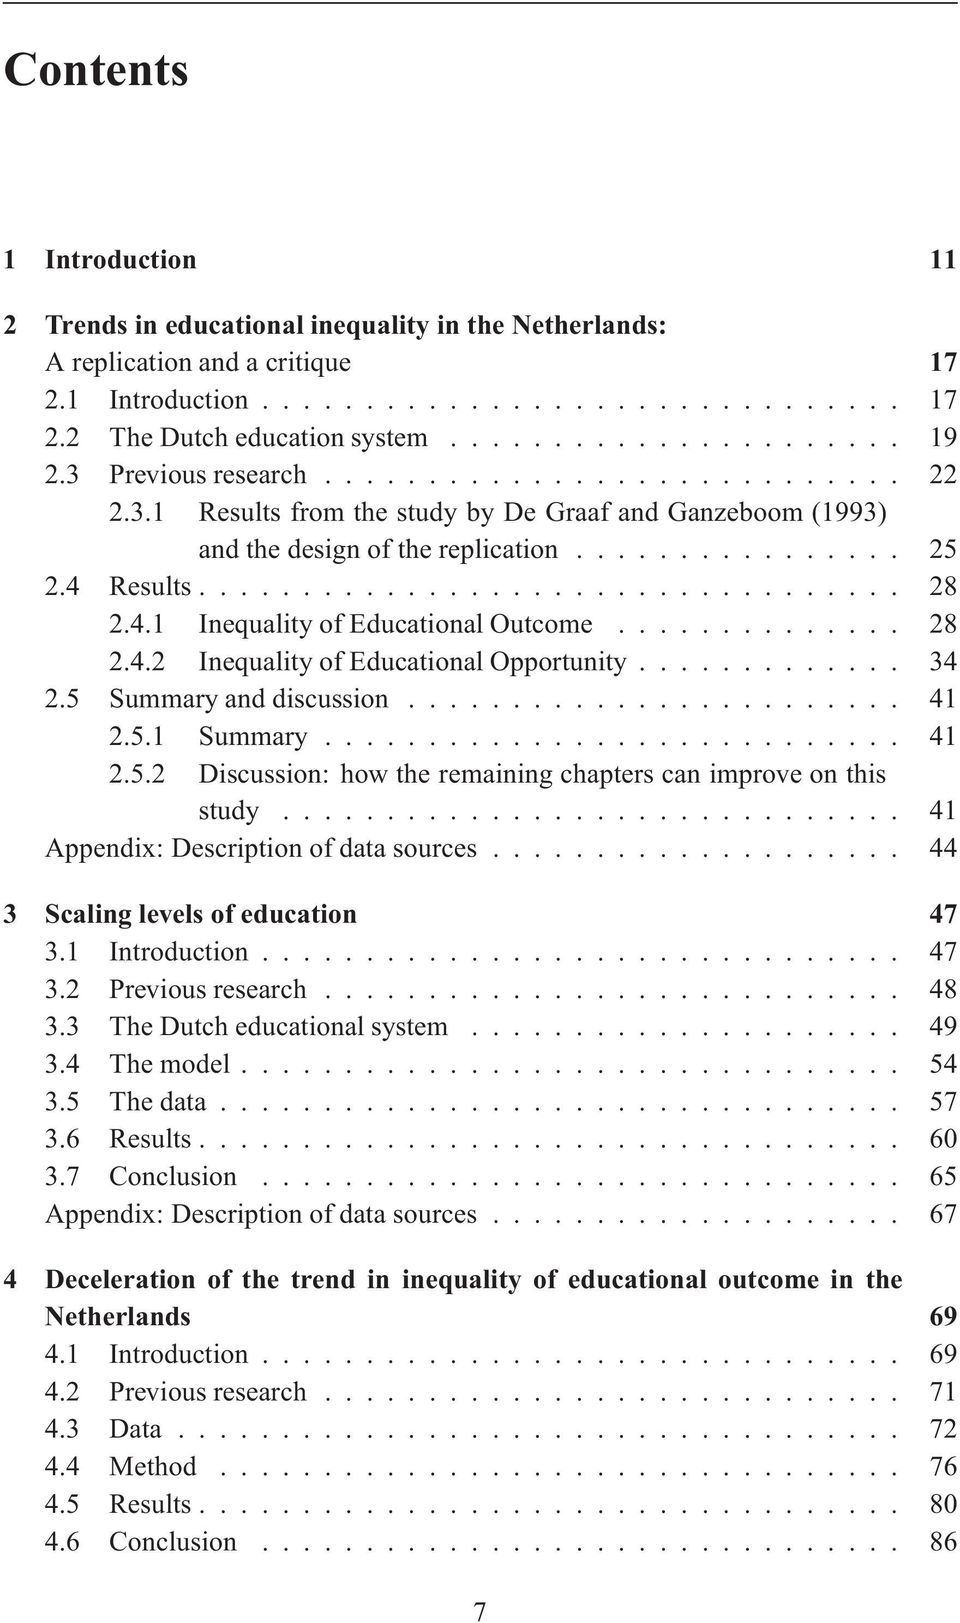 4.1 InequalityofEducationalOutcome.............. 28 2.4.2 InequalityofEducationalOpportunity............. 34 2.5 Summaryanddiscussion........................ 41 2.5.1 Summary............................ 41 2.5.2 Discussion: how the remaining chapters can improve on this study.